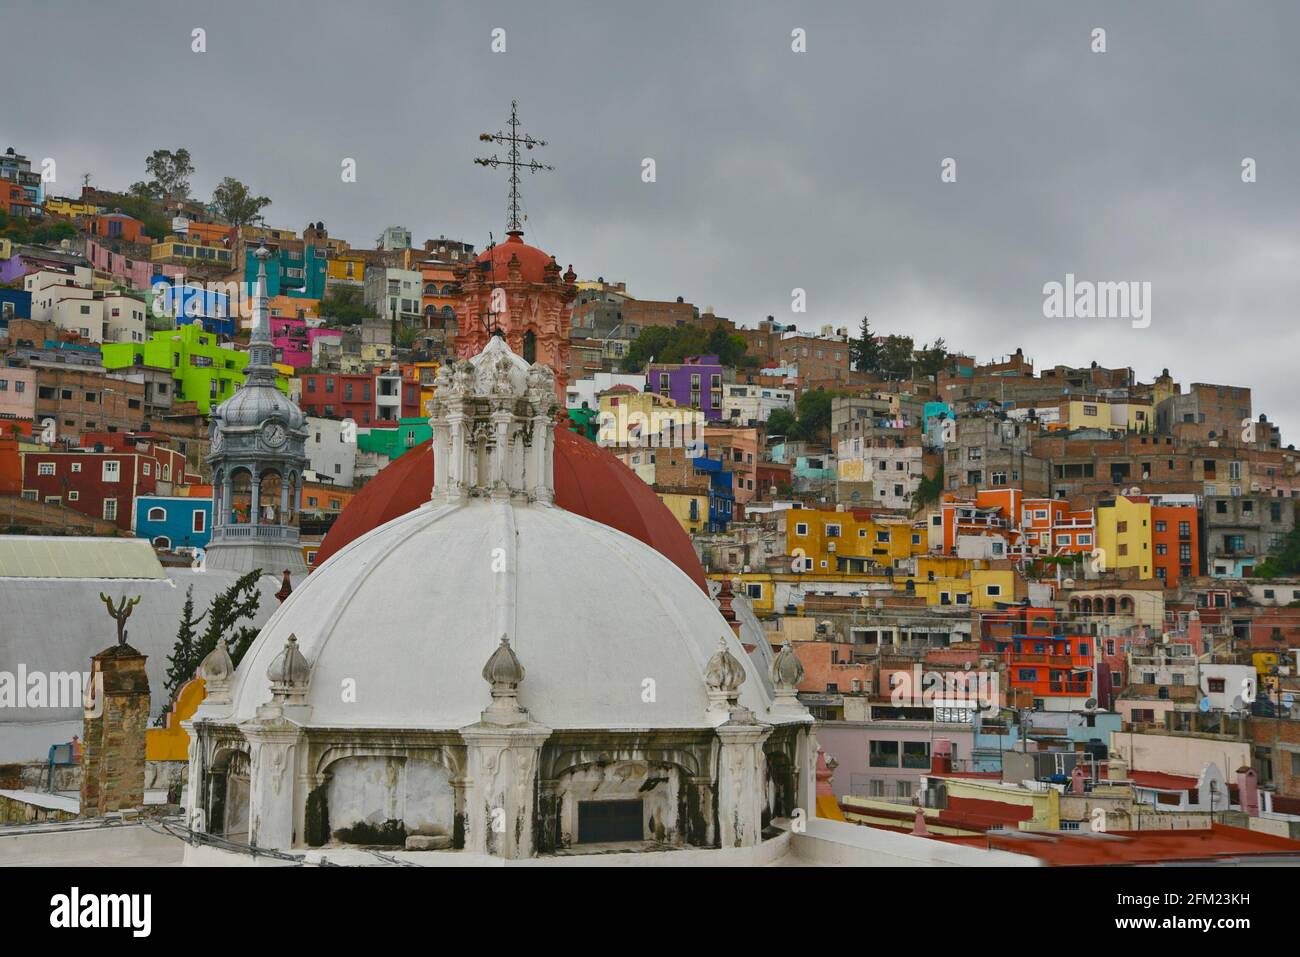 Panoramic view of Guanajuato with the colorful Spanish Colonial architecture and the Baroque style Templo de San Diego in Guanajuato, Mexico. Stock Photo